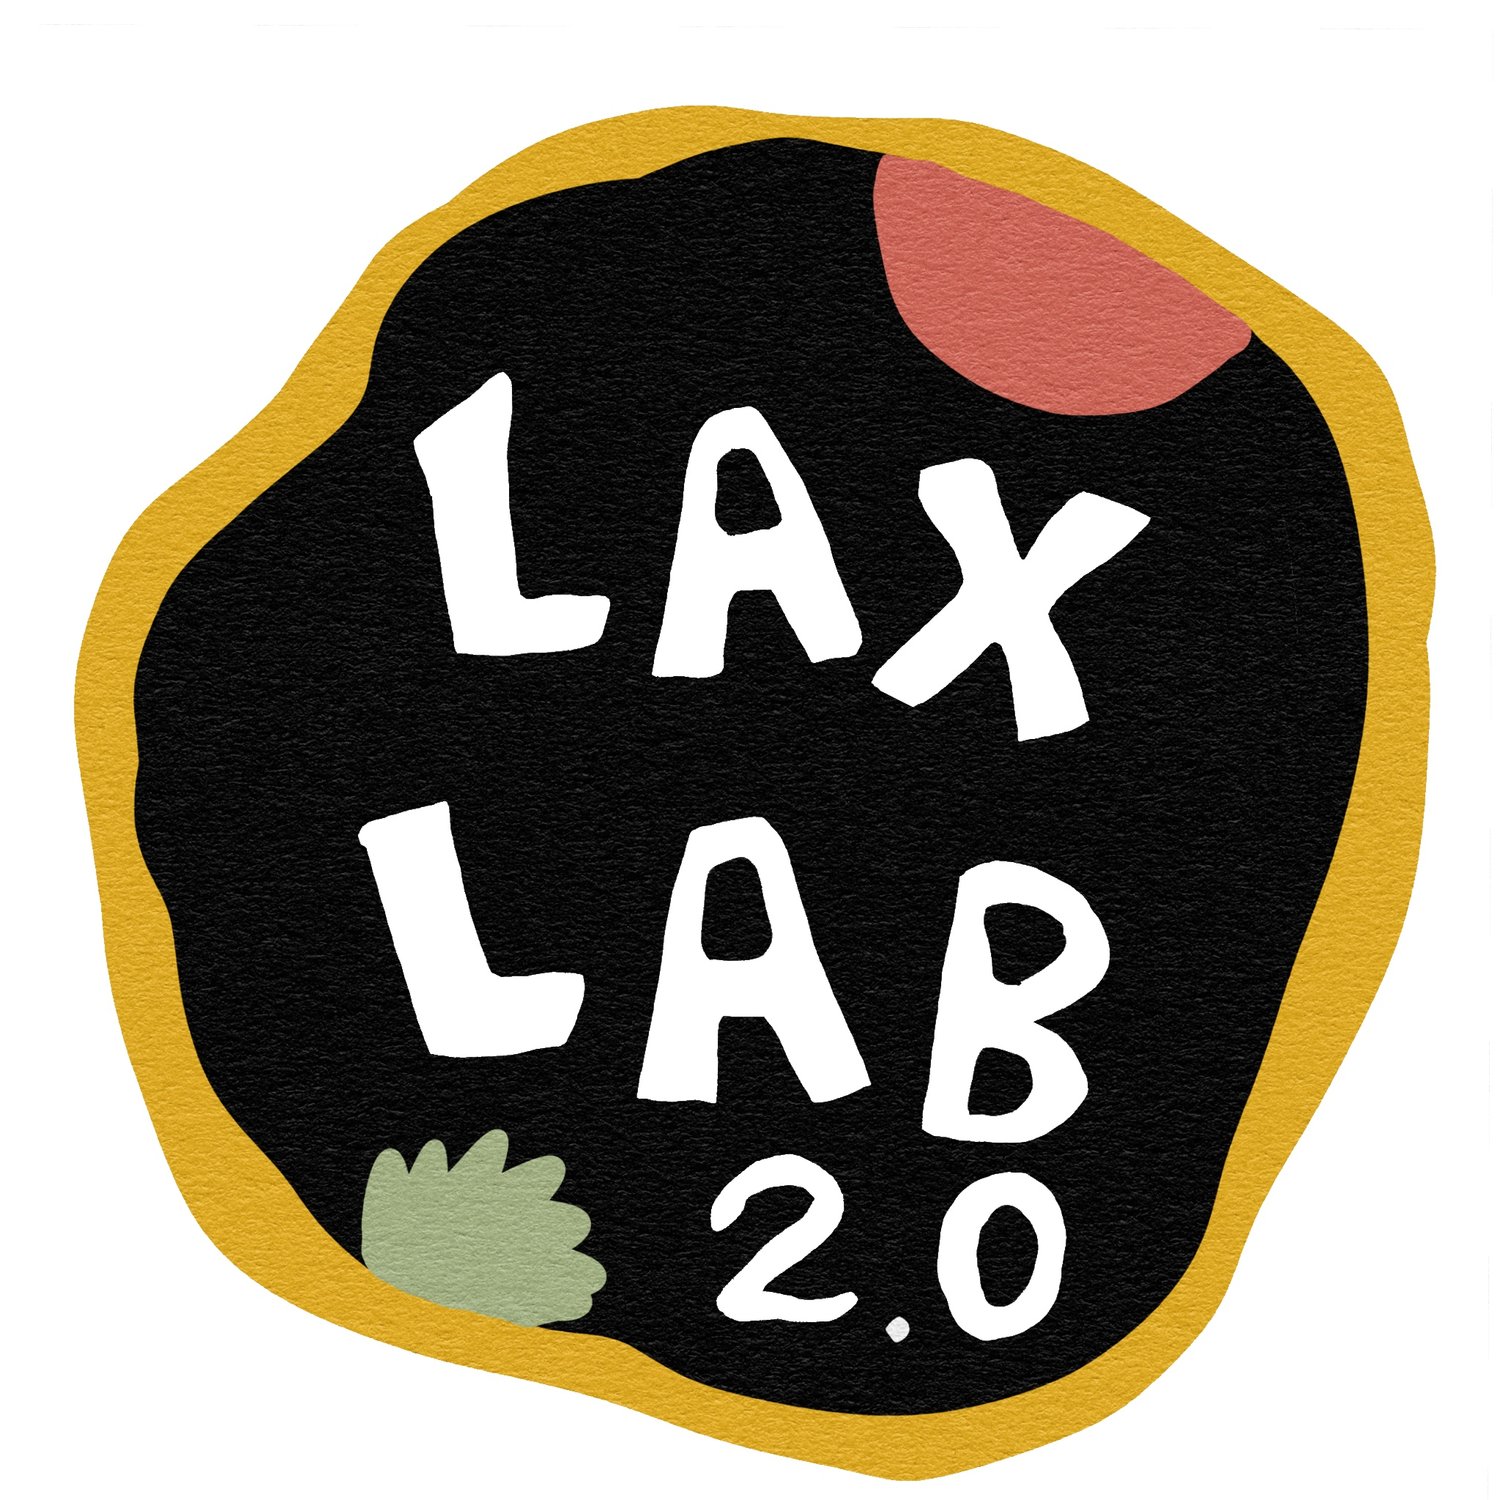 LAX LAB 2.0 / school of climate fiction